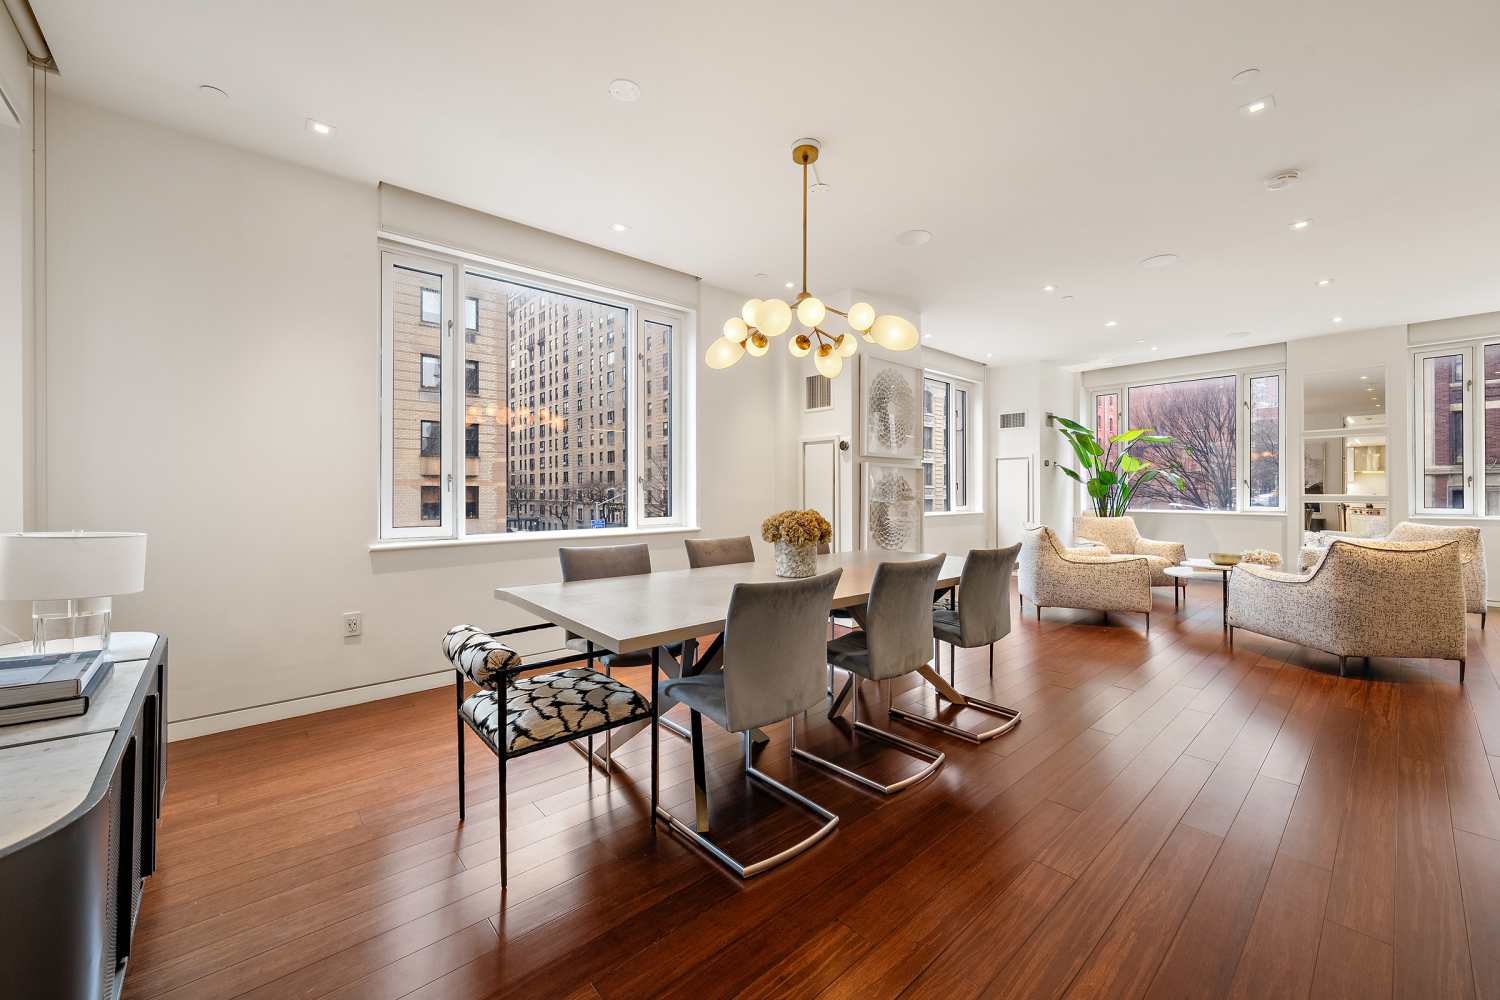 21 East 96th Street 3rd/4th, Carnegie Hill, Upper East Side, NYC - 6 Bedrooms  
5.5 Bathrooms  
14 Rooms - 